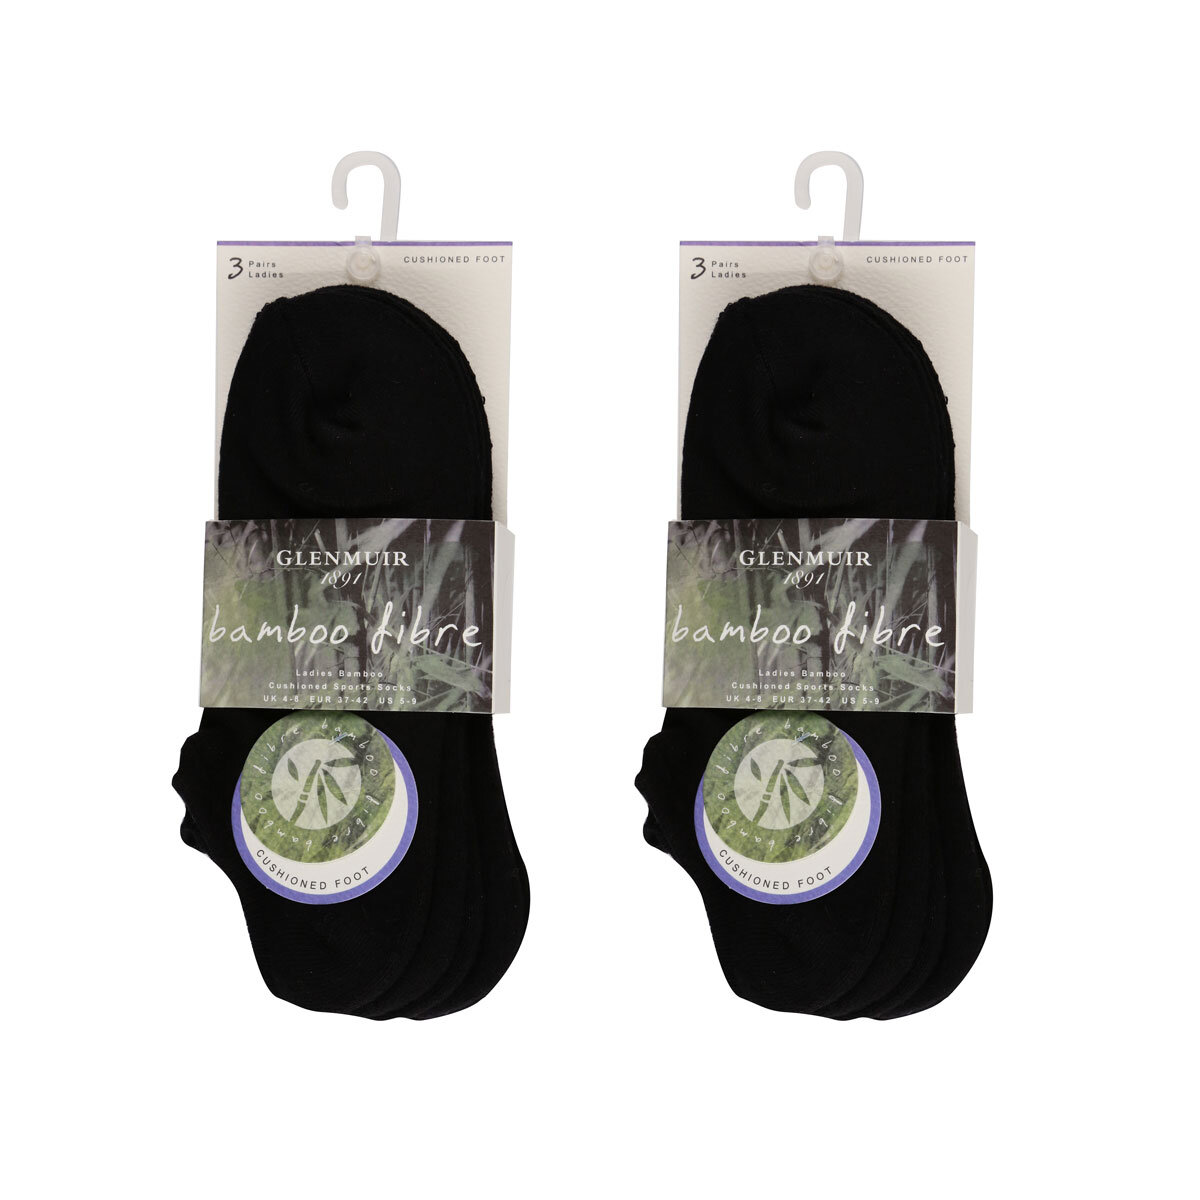 Glenmuir Women's 2 x 3 Pack Bamboo Cushioned Trainer Socks in Black, Size 4-8